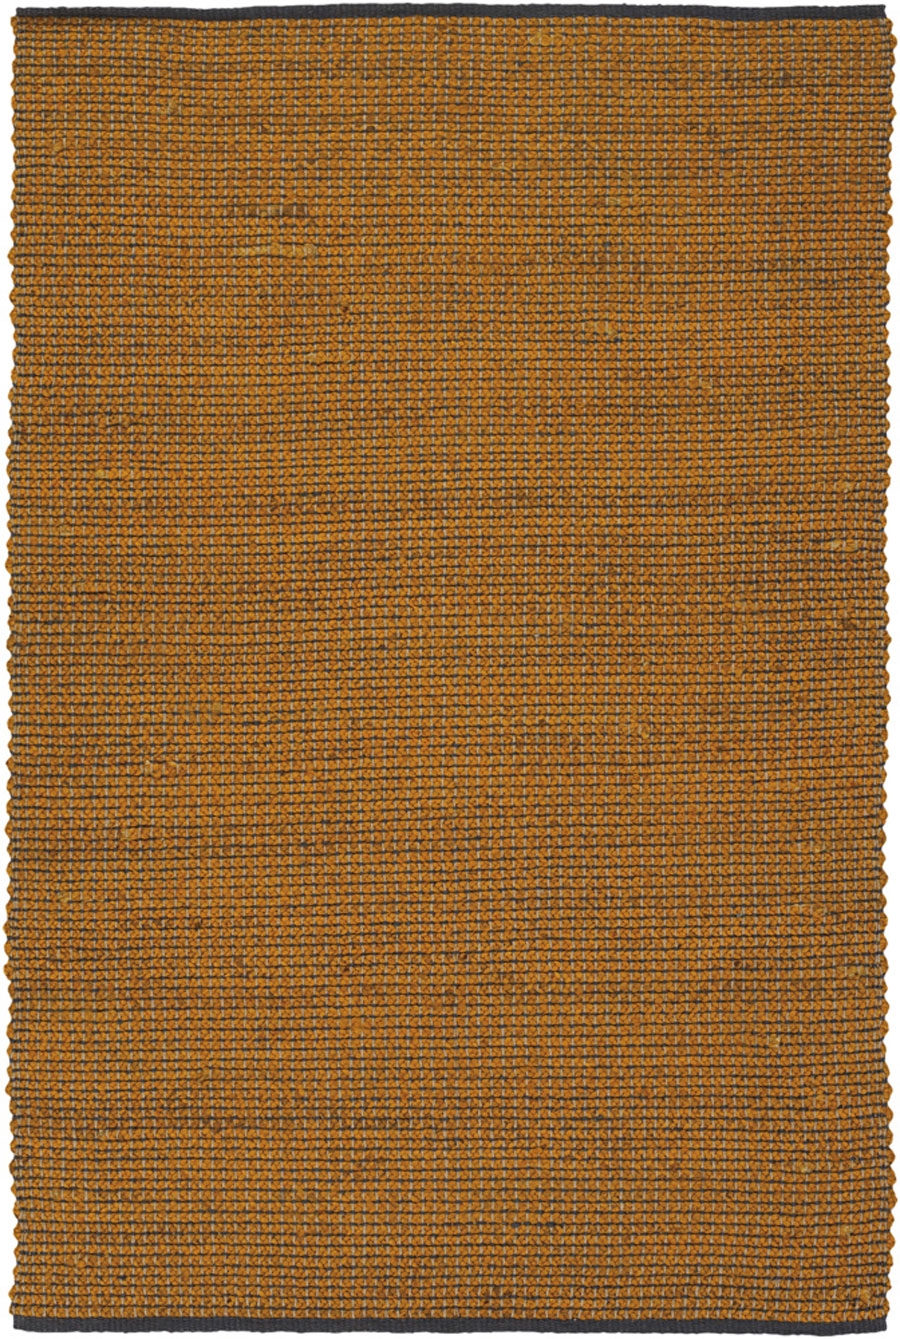 Chandra  Zola Floral Brown Area Rug; Runner 2'6'' x 7'6''